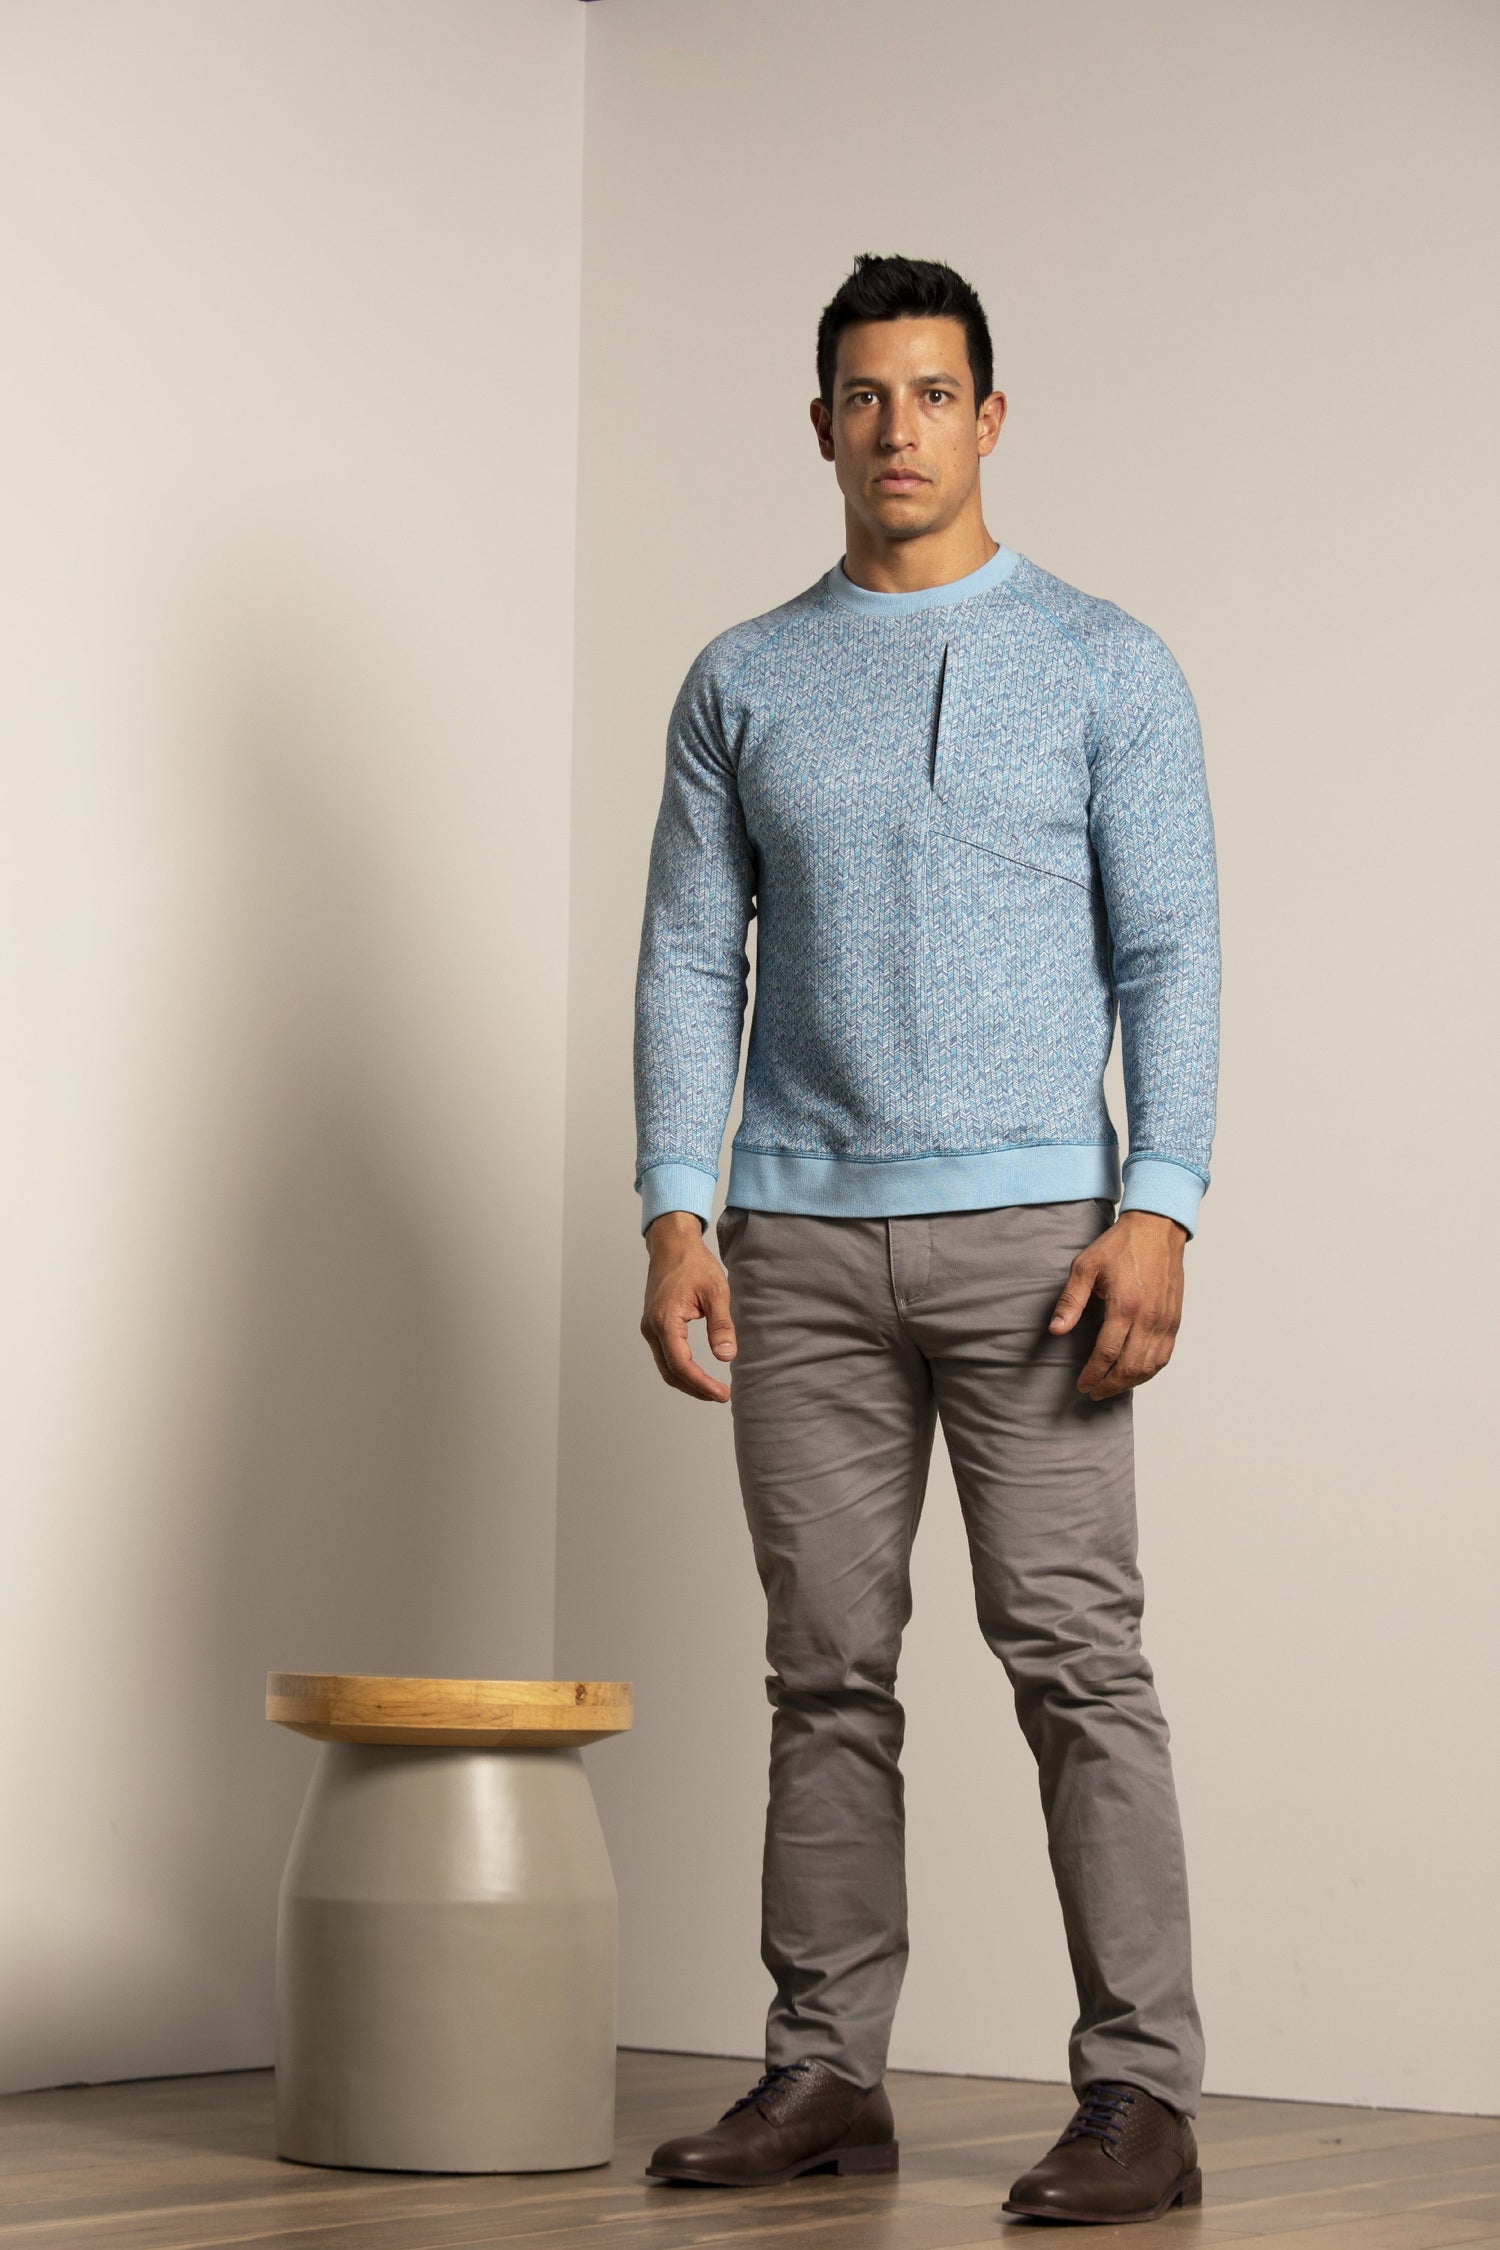 Jameson in Double Face Knit Chevron Blue - Lords Of Harlech